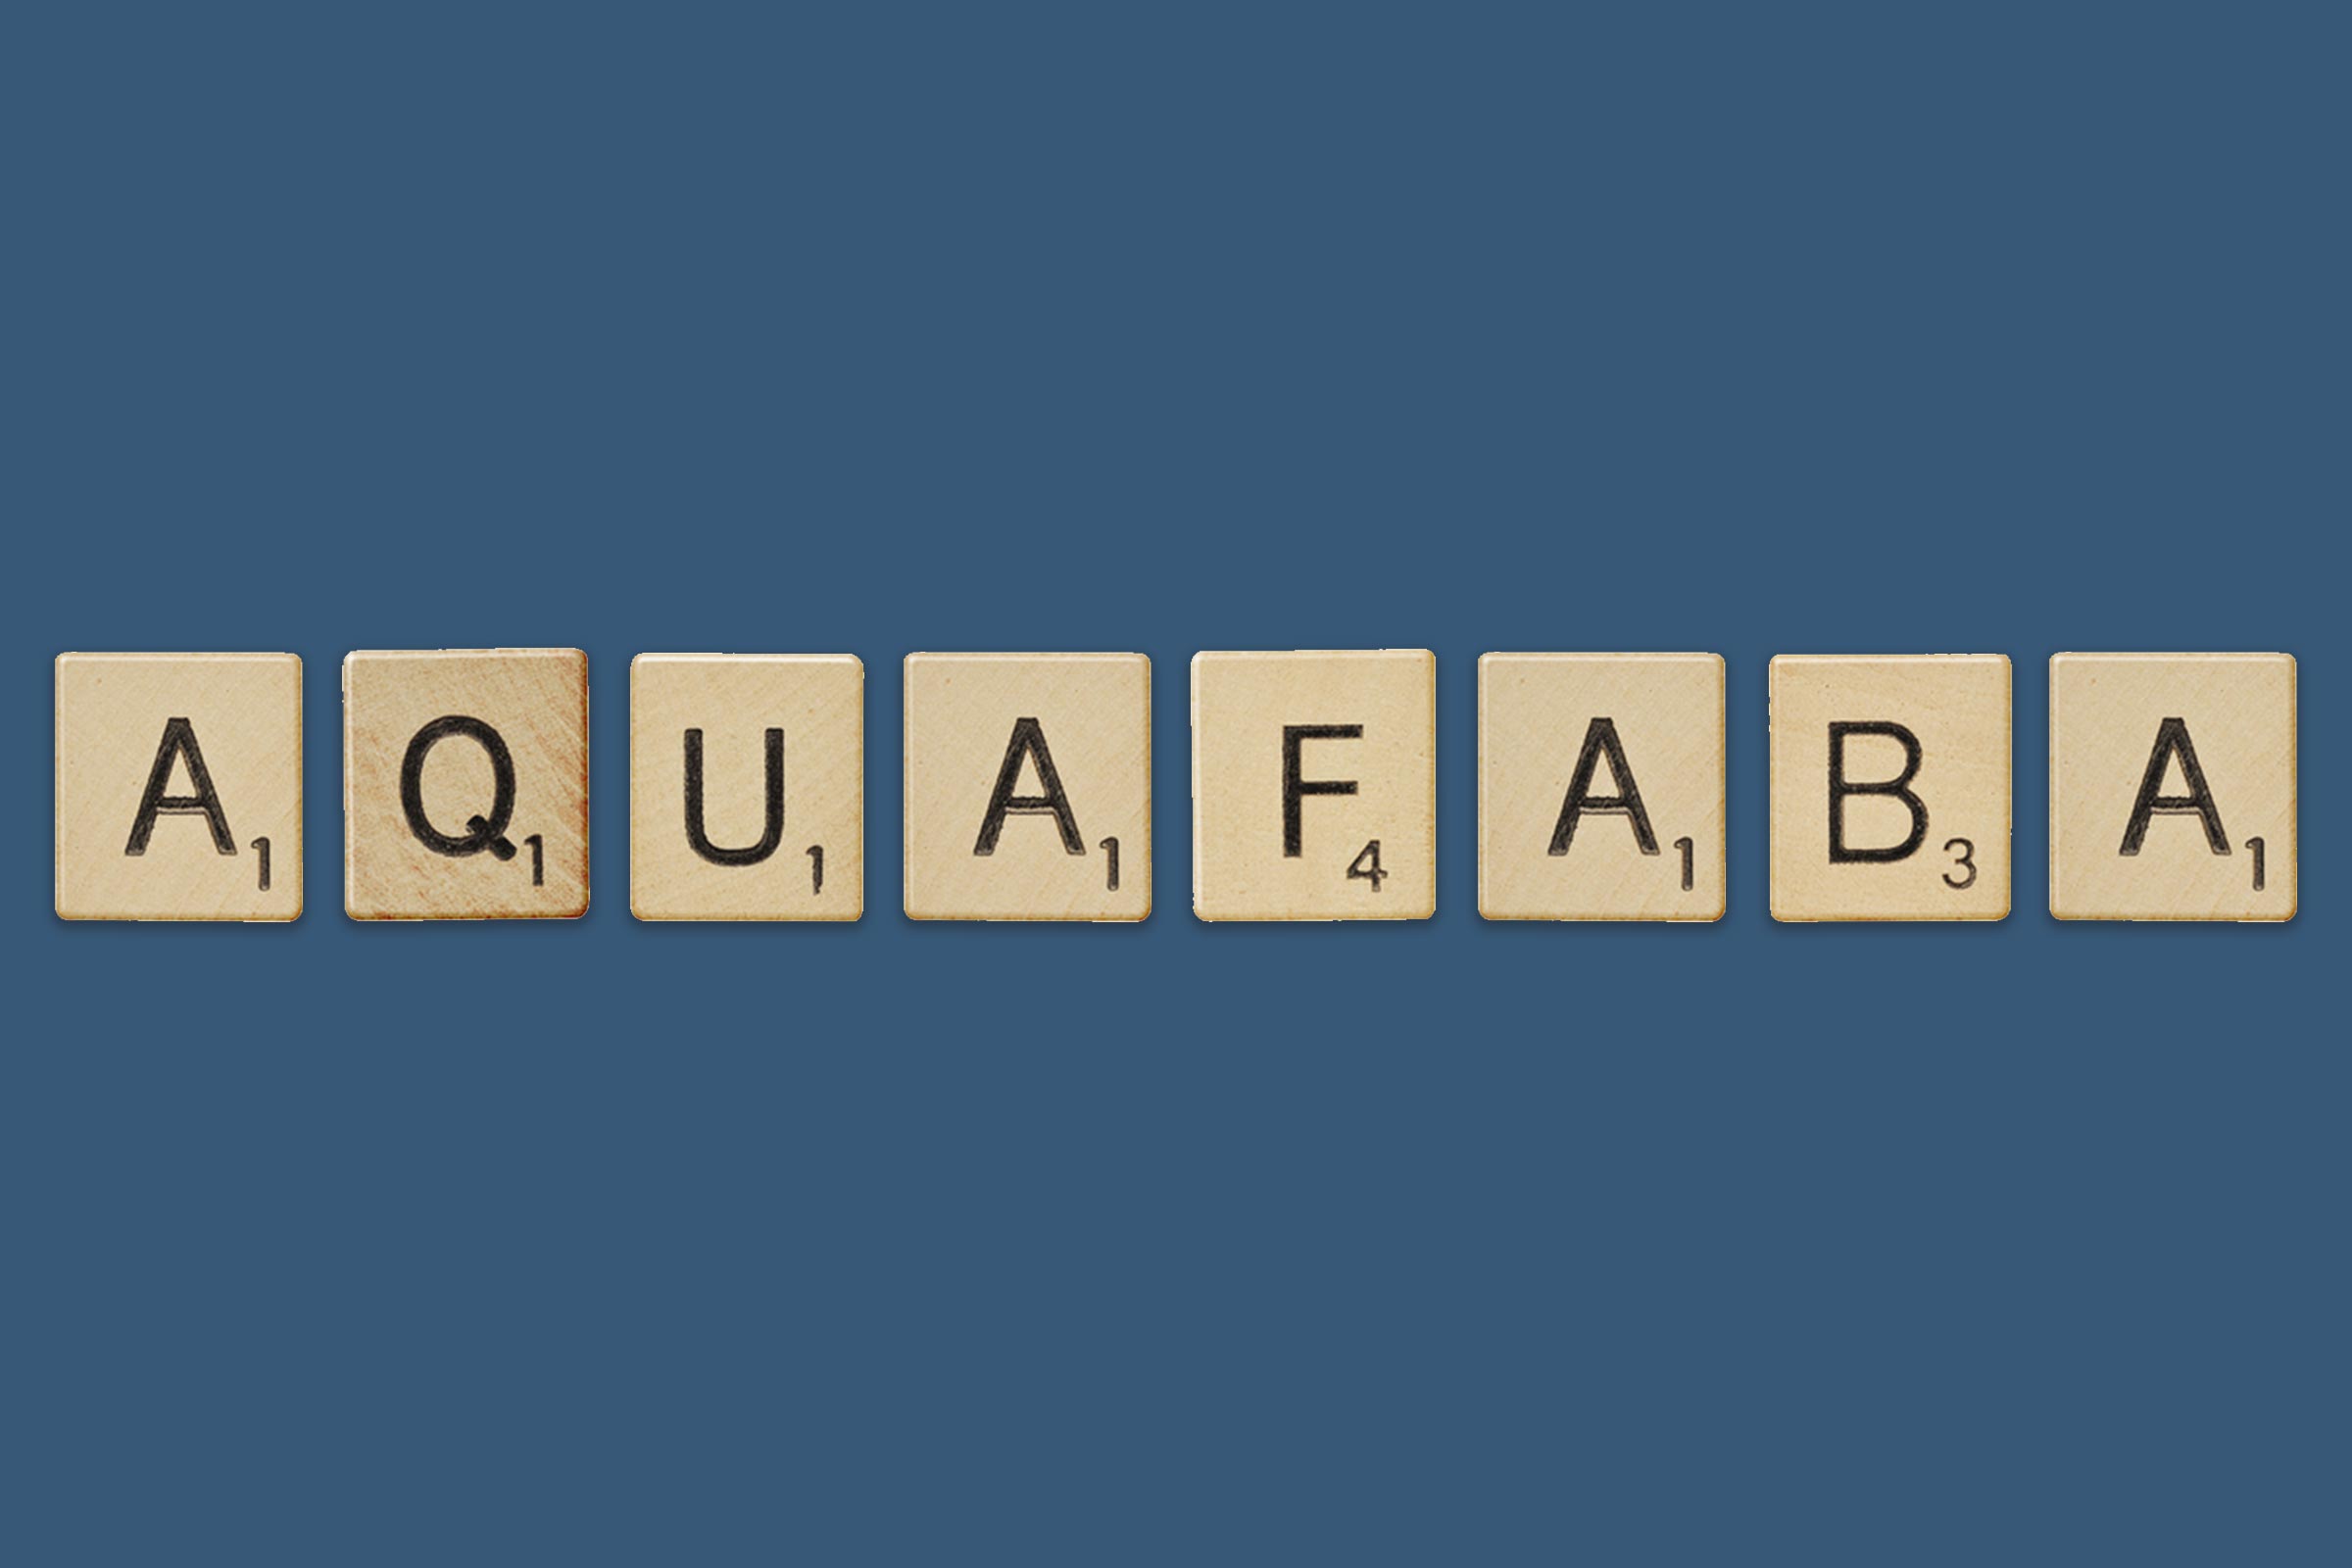 09-words-that-have-just-been-added-to-the-scrabble-dictionary-shutterstock_-504522886-chones_1.jpg